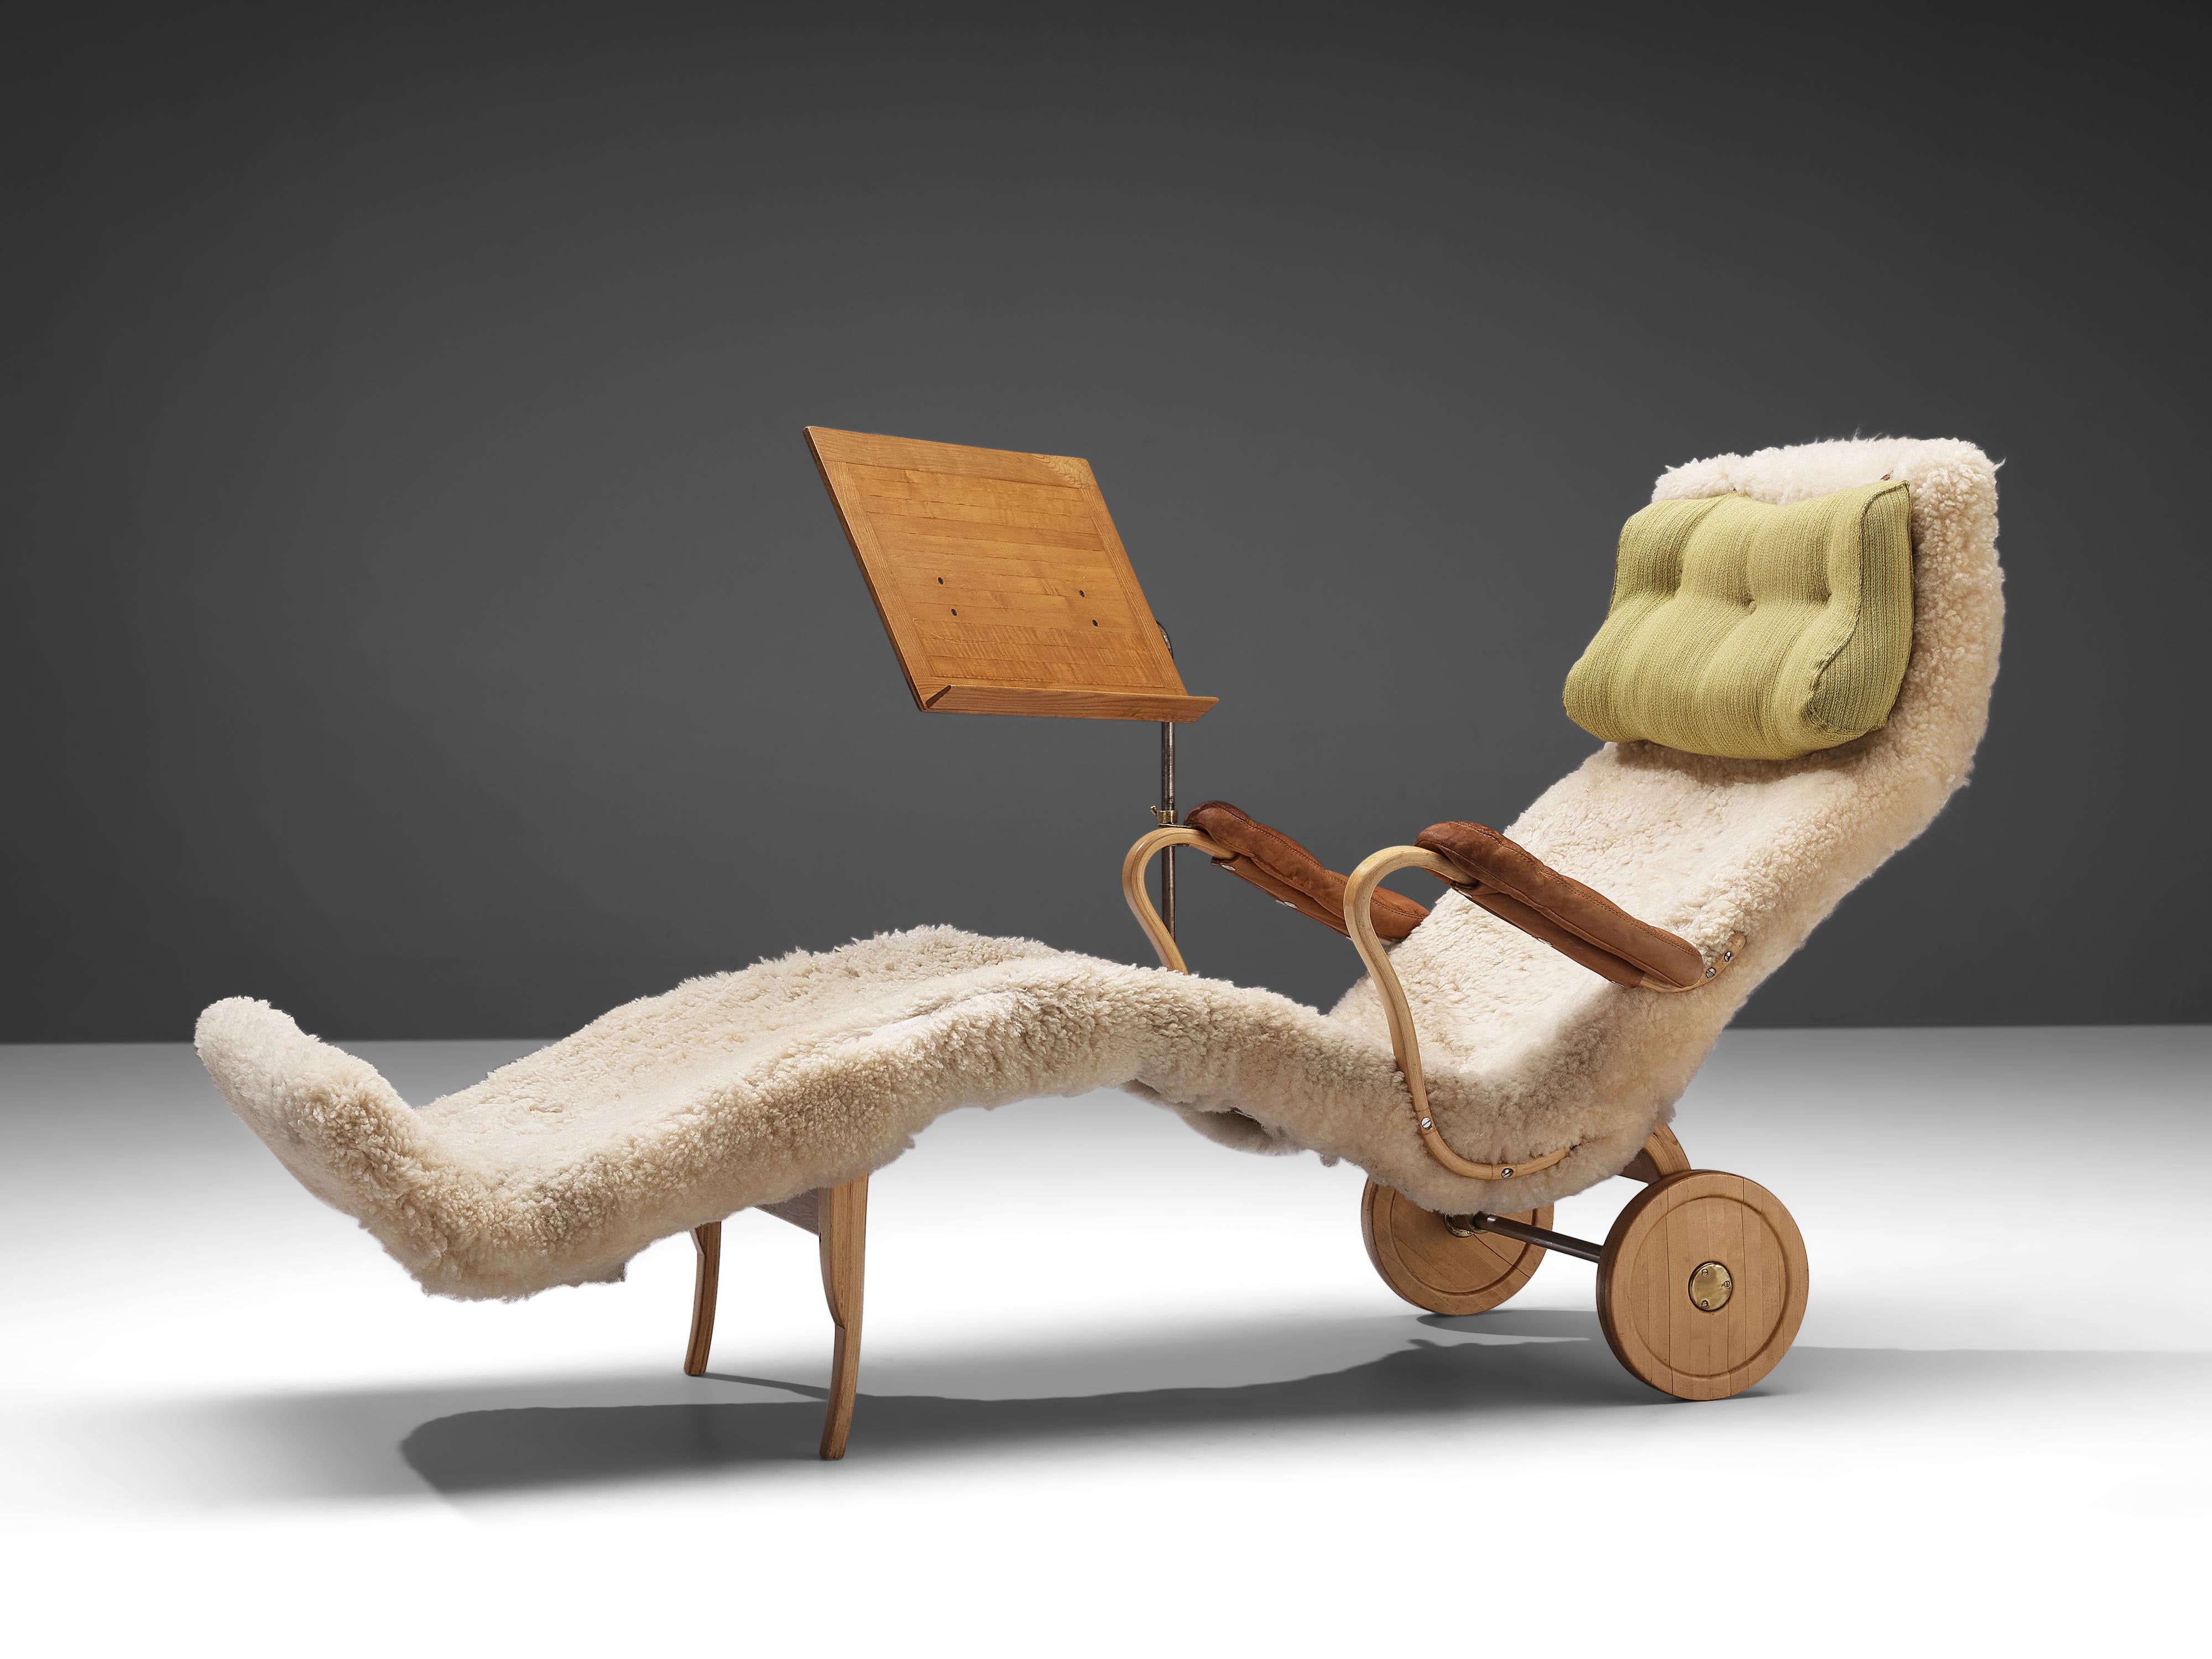 Bruno Mathsson for Karl Mathsson, chaise longue ‘Pernilla’, sheepskin, leather, beech, fabric, brass, Sweden, design 1944

The ‘Pernilla’ chaise longue is one of the most vibrant designs by Swedish designer Bruno Mathsson. The beautifully curved